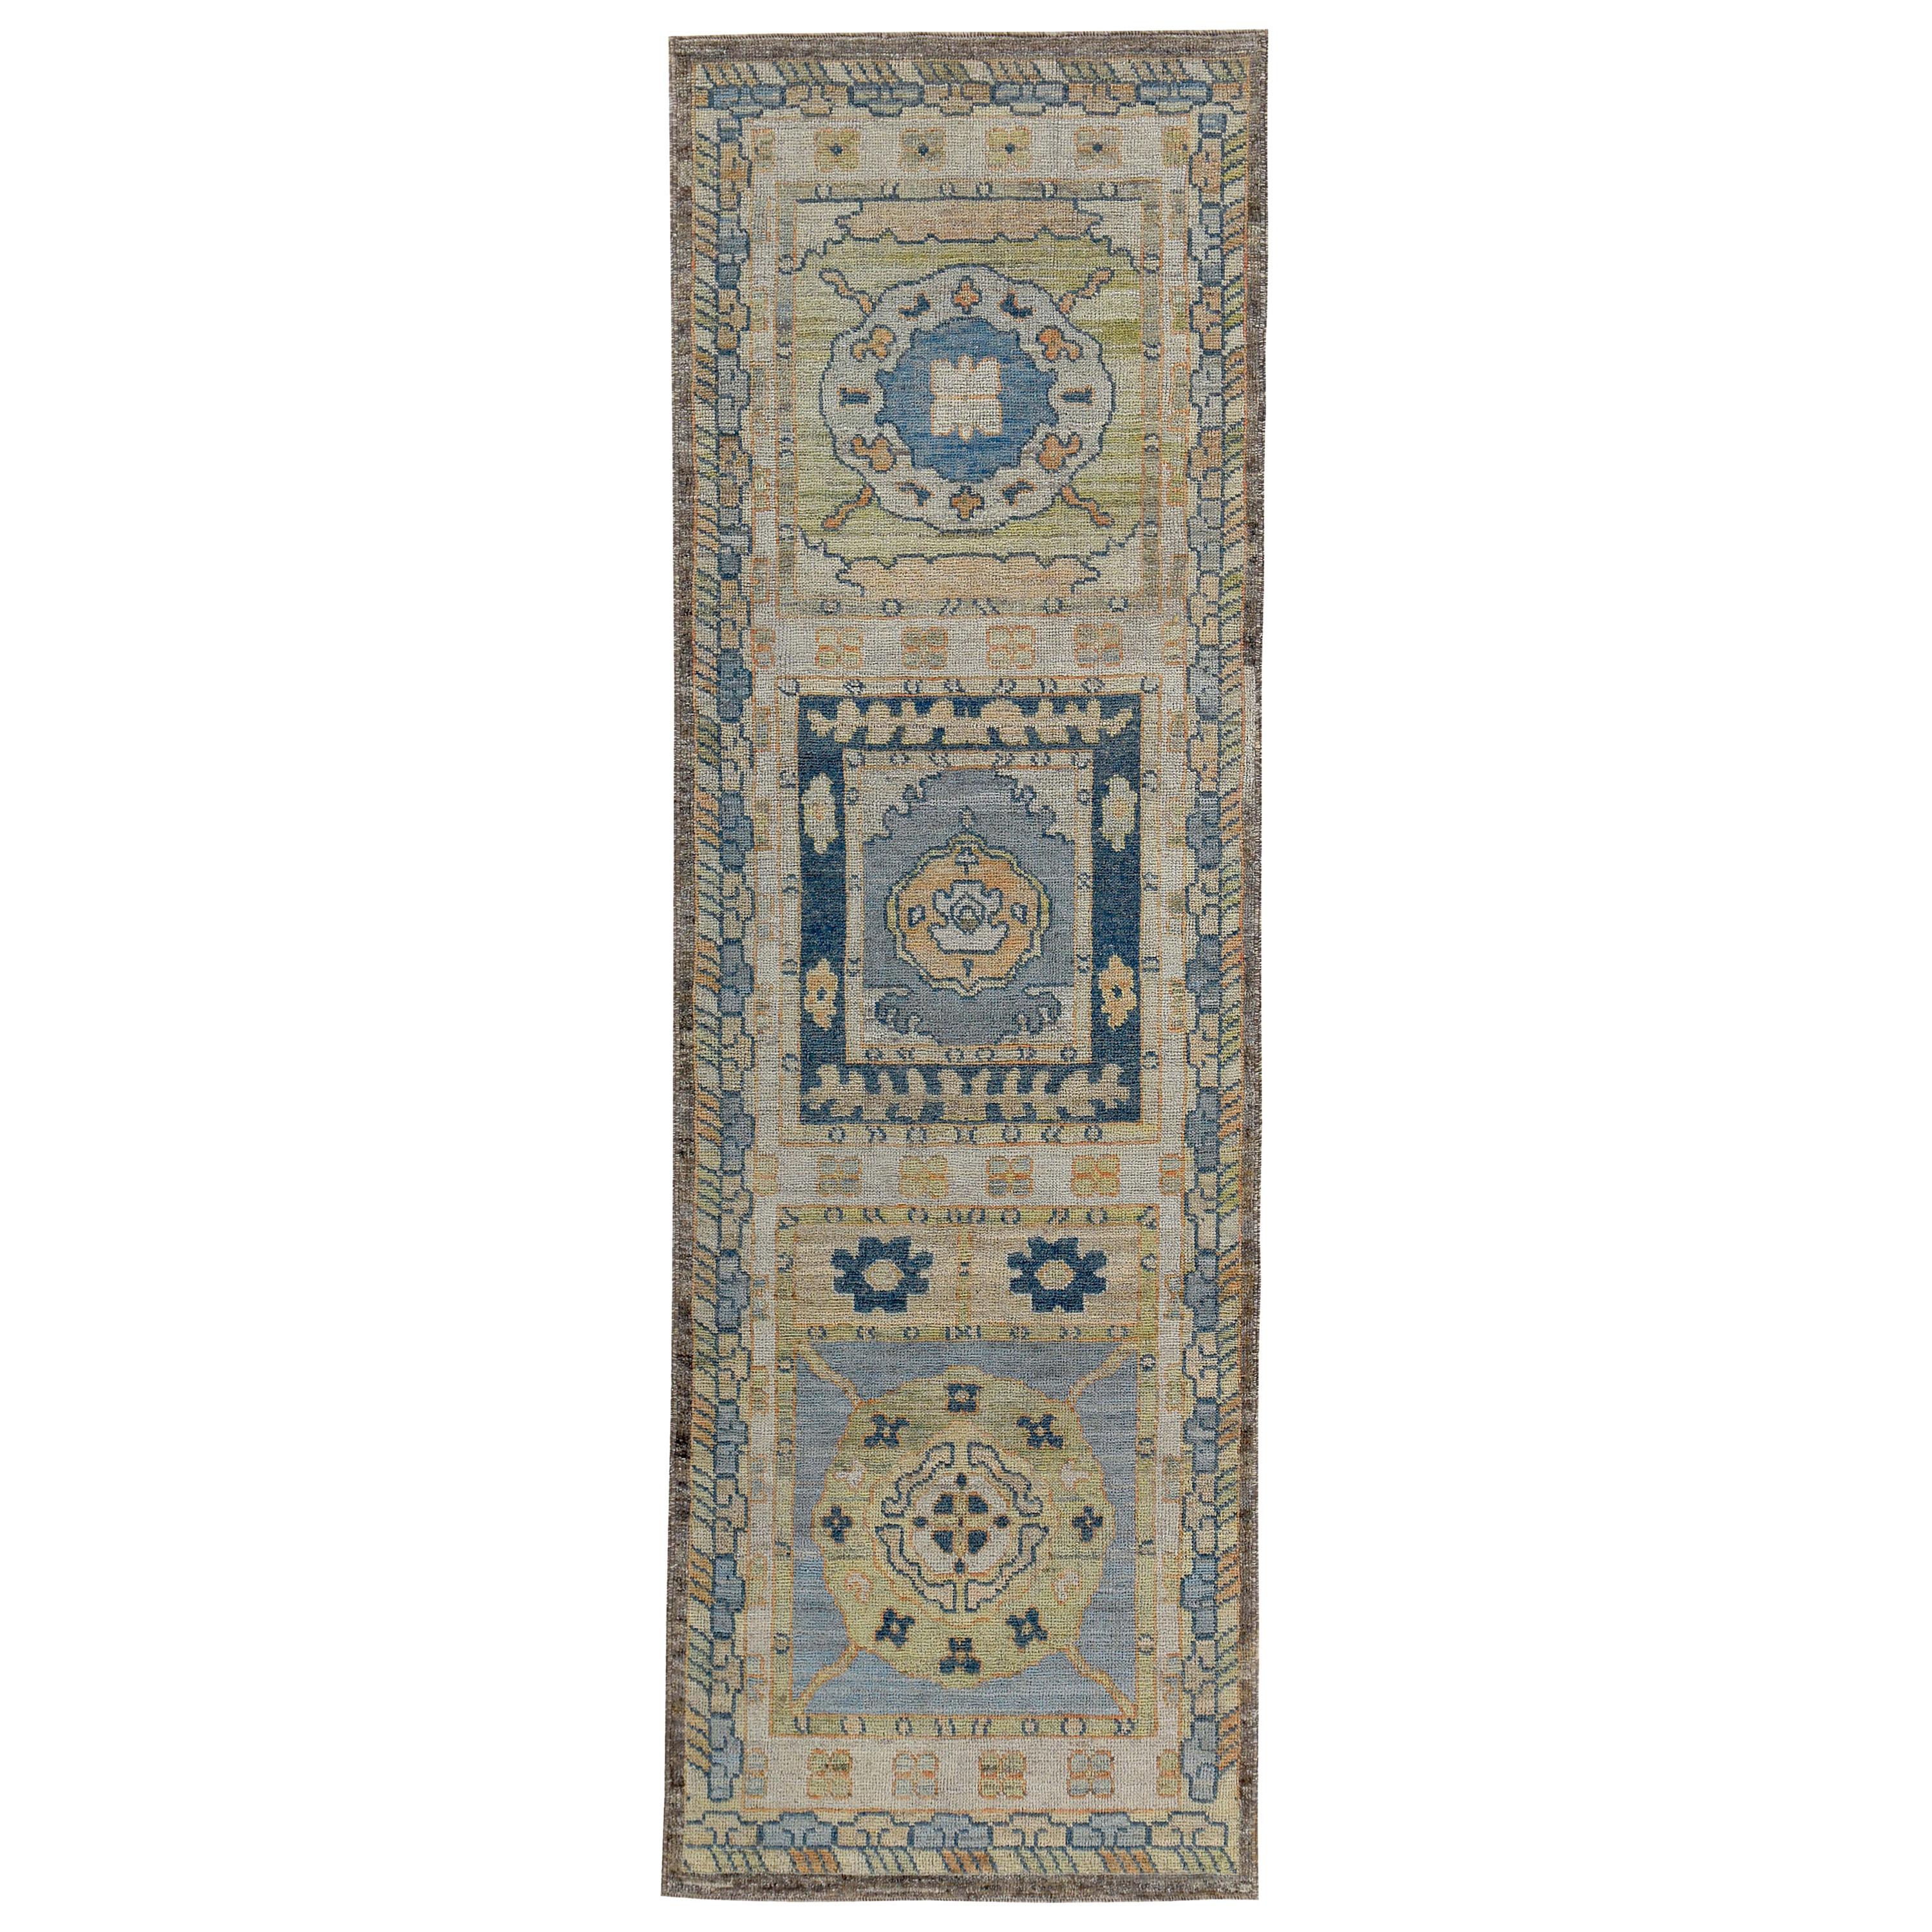 Turkish Oushak Runner Rug with Blue and Orange Floral Patterns on Beige Field